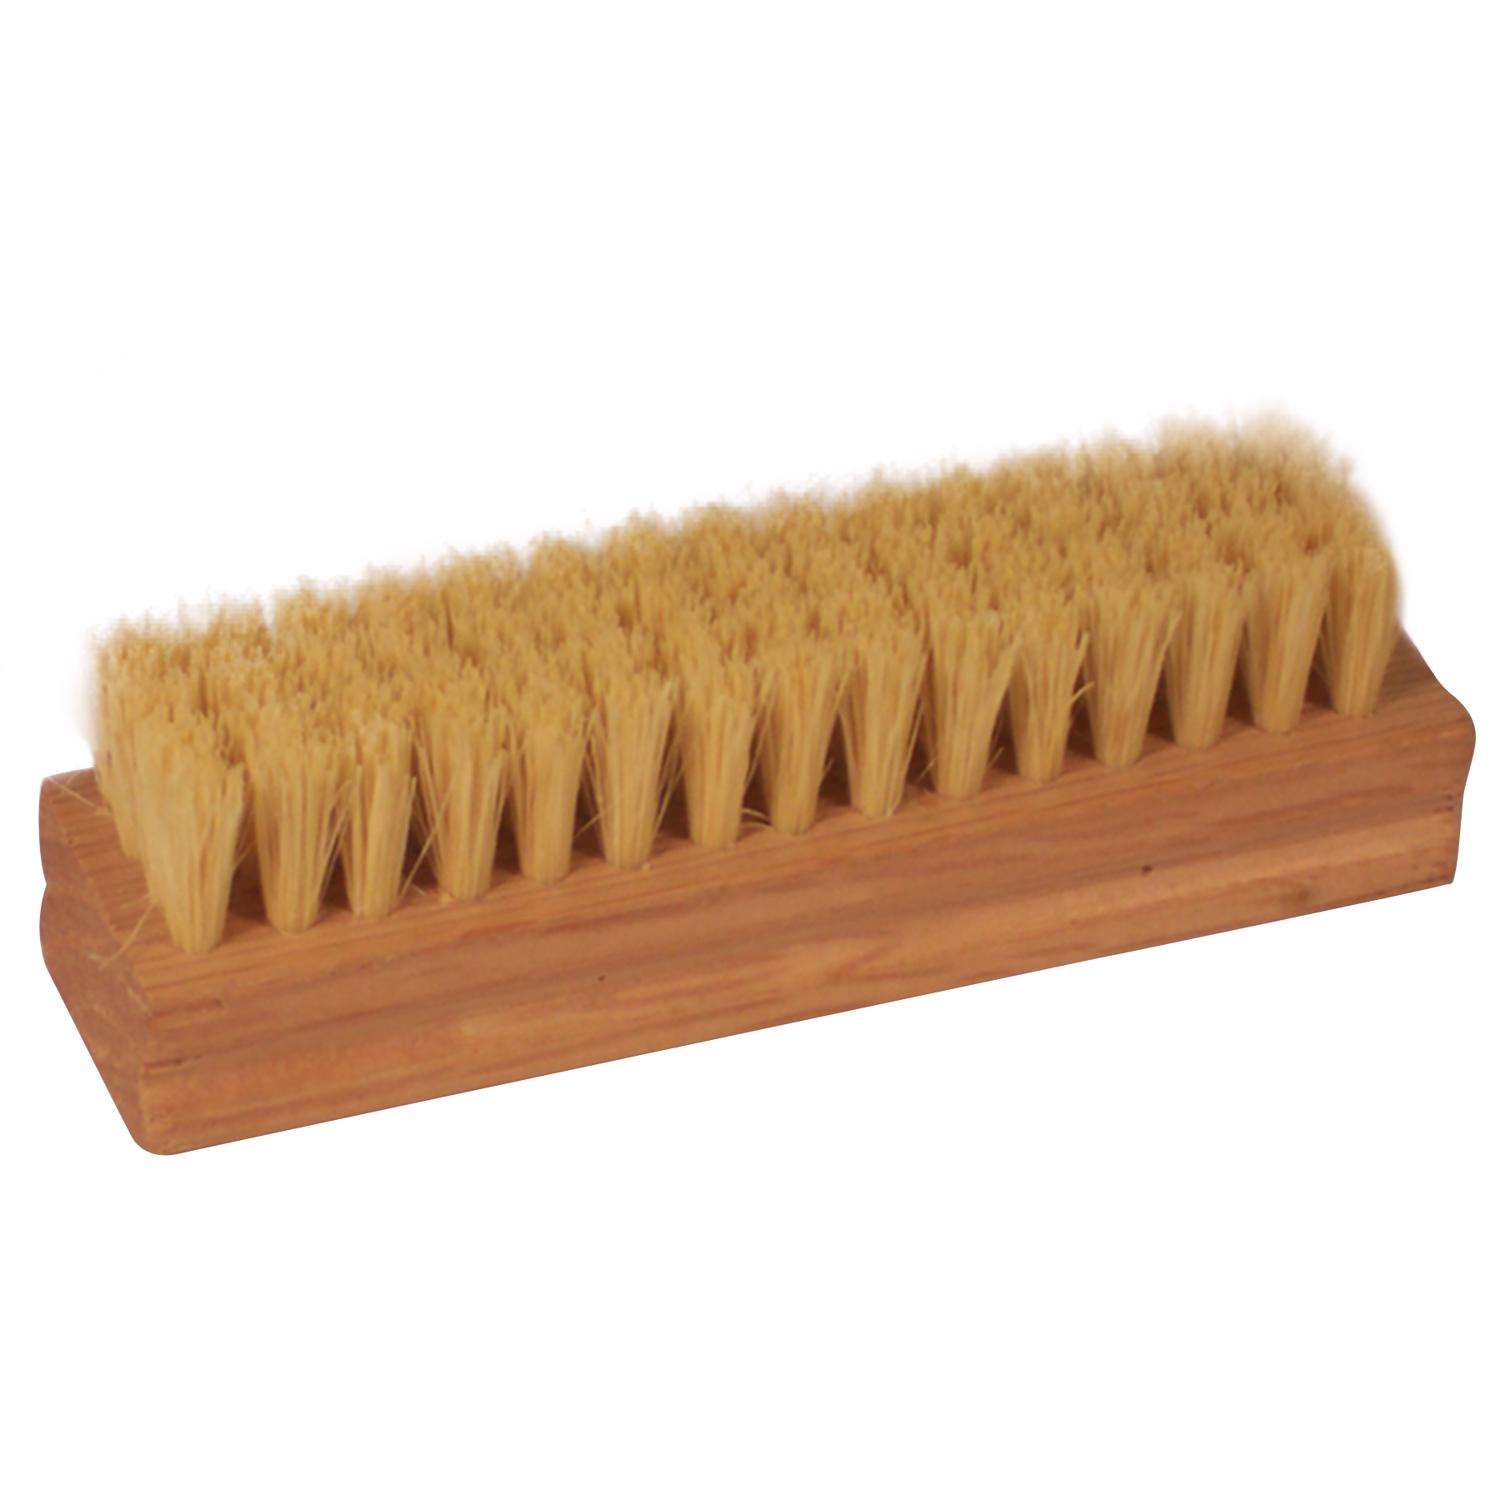 Brass Wire Utility Scrub Brush for Cleaning 9 Hardwood Handle (Made in USA)